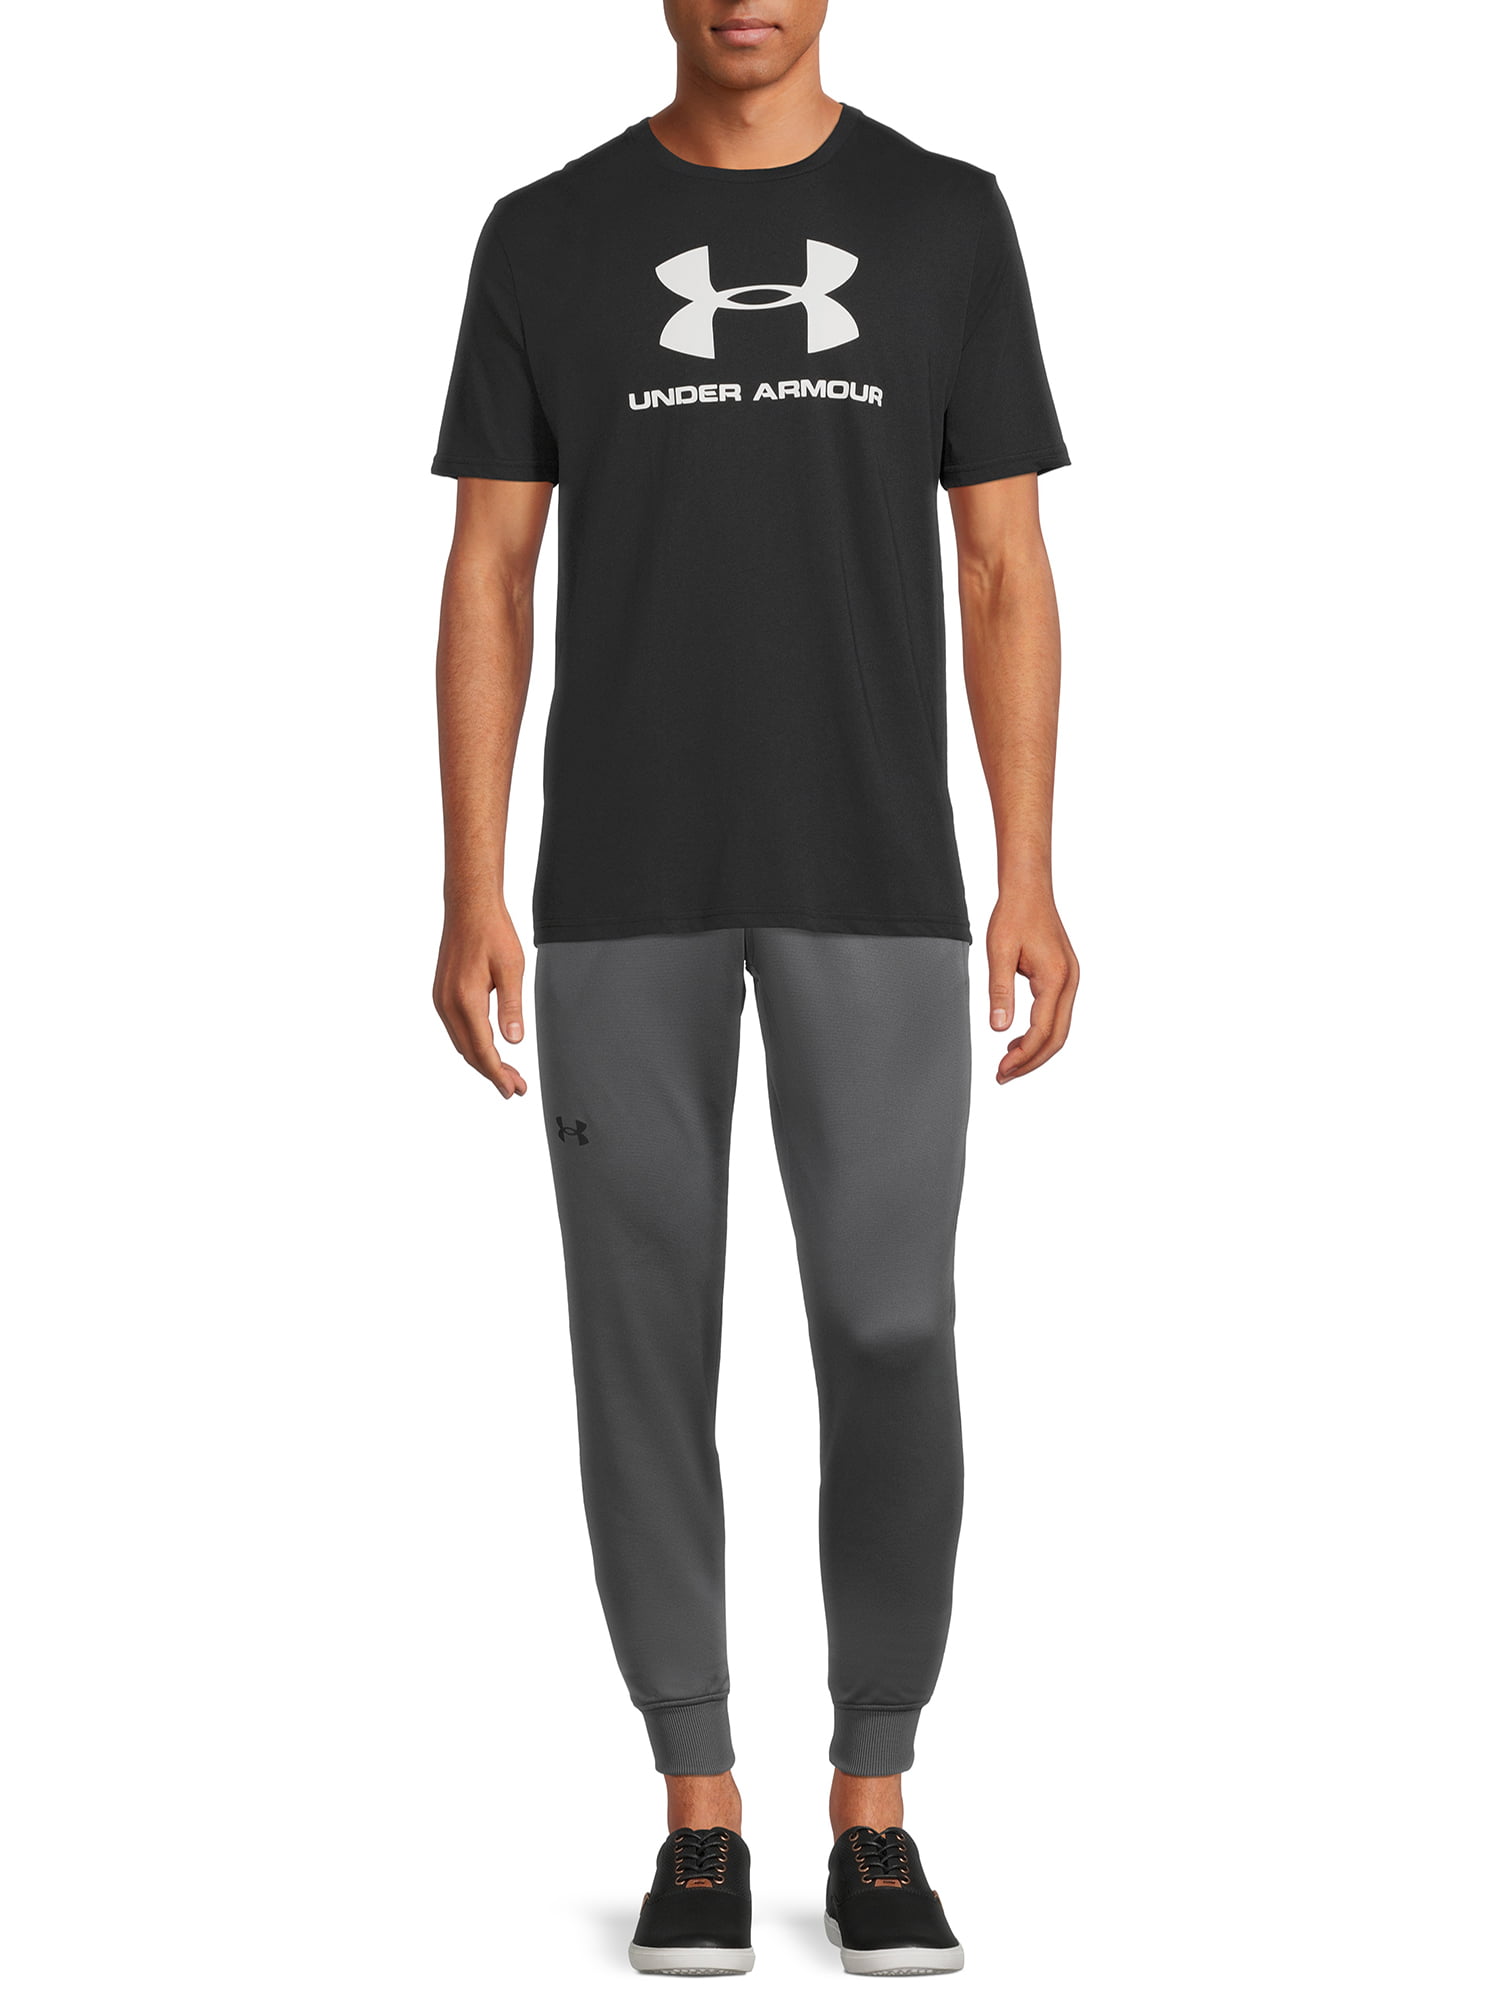 Under Armour Men\'s and Big Sizes 2XL to UA Men\'s Logo up Sleeves, with T-Shirt Short Sportstyle